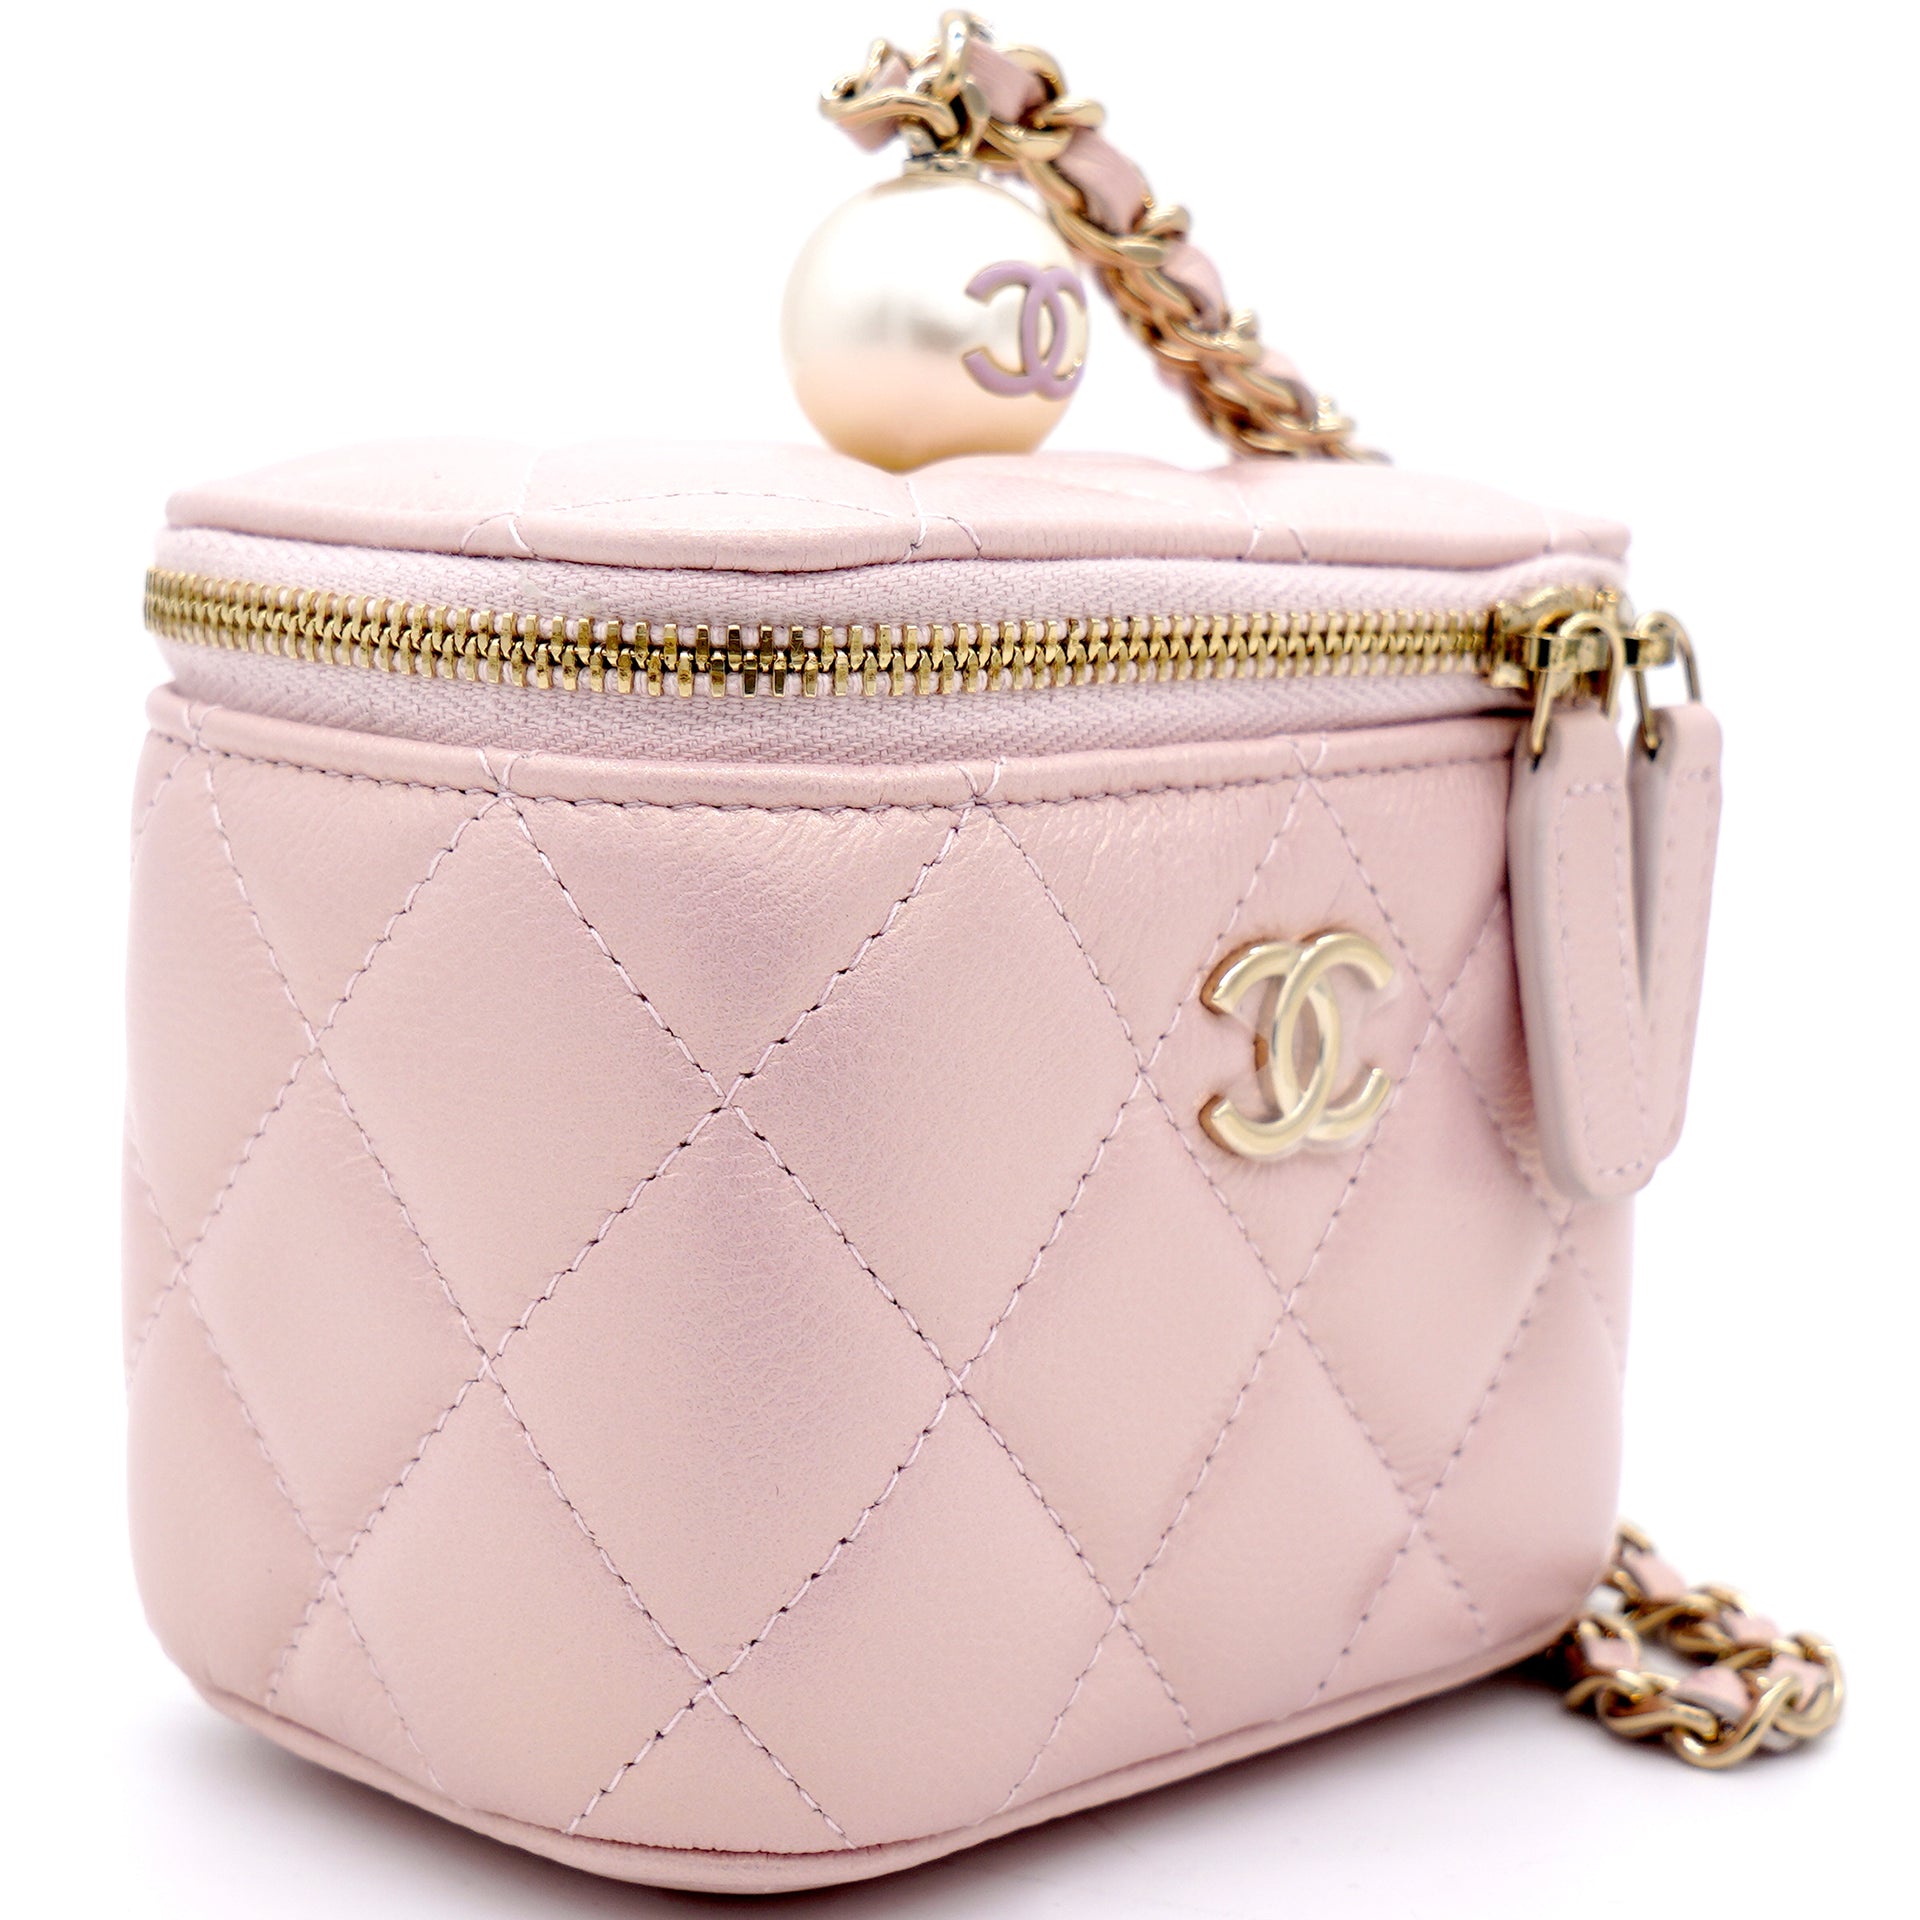 Mini Caviar GHW Vanity Case with Pearl Details Light Pink